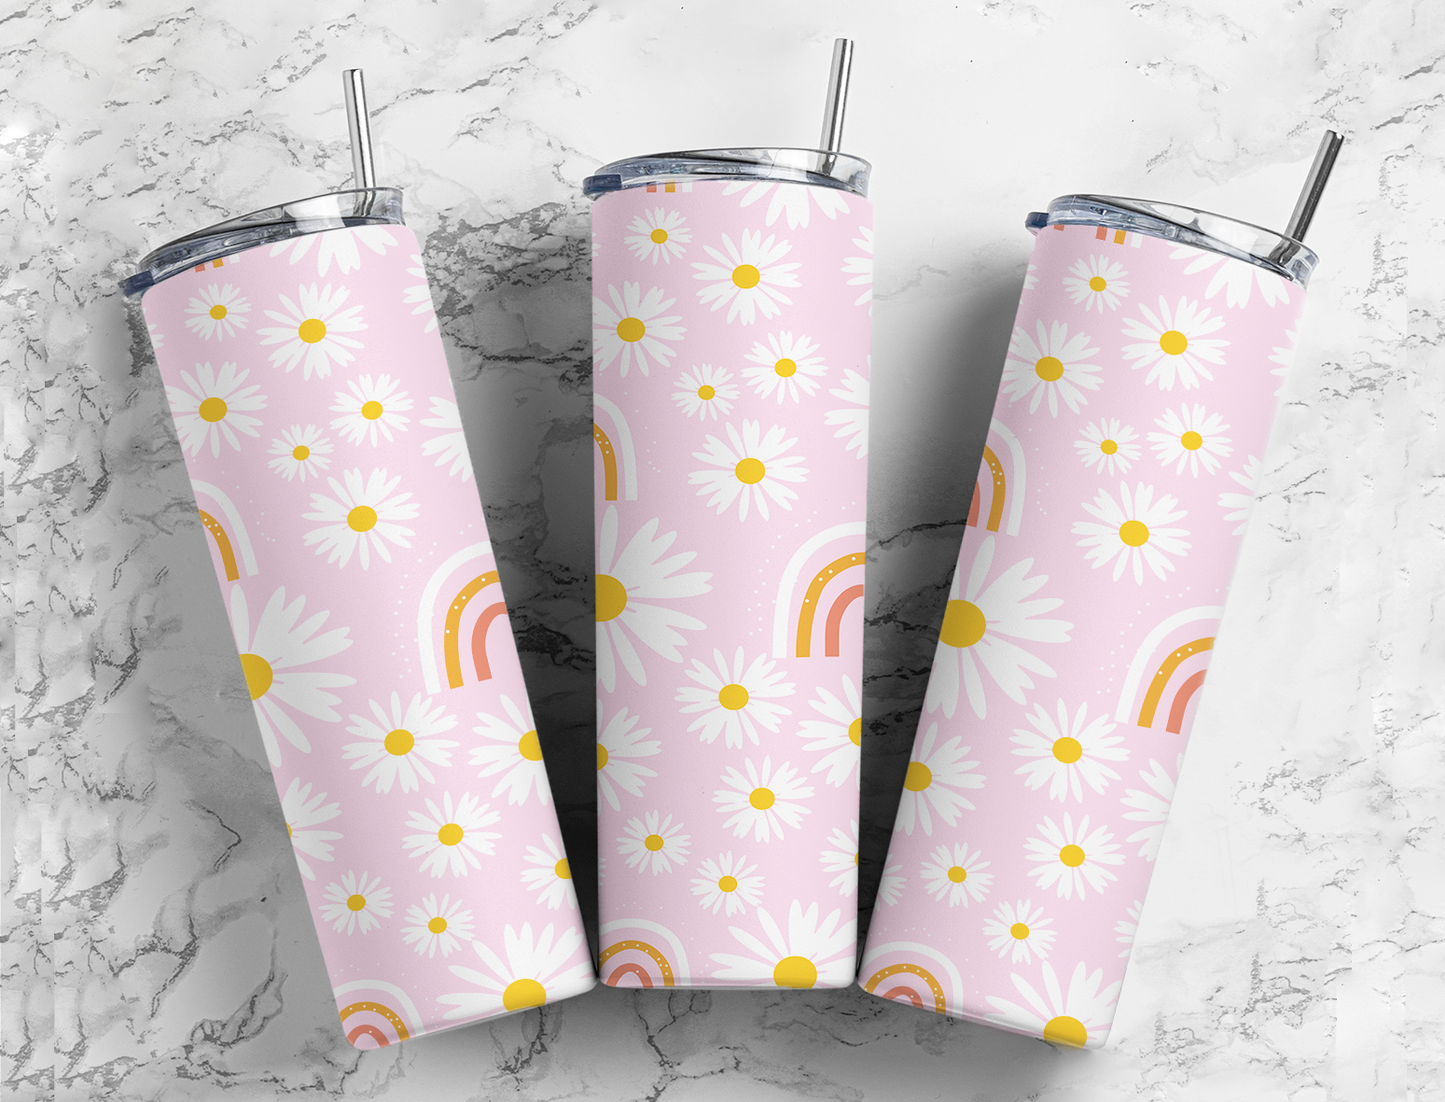 Happy Place 20oz Insulated Tumblers, Gift Idea For The Boho Chic Lovers